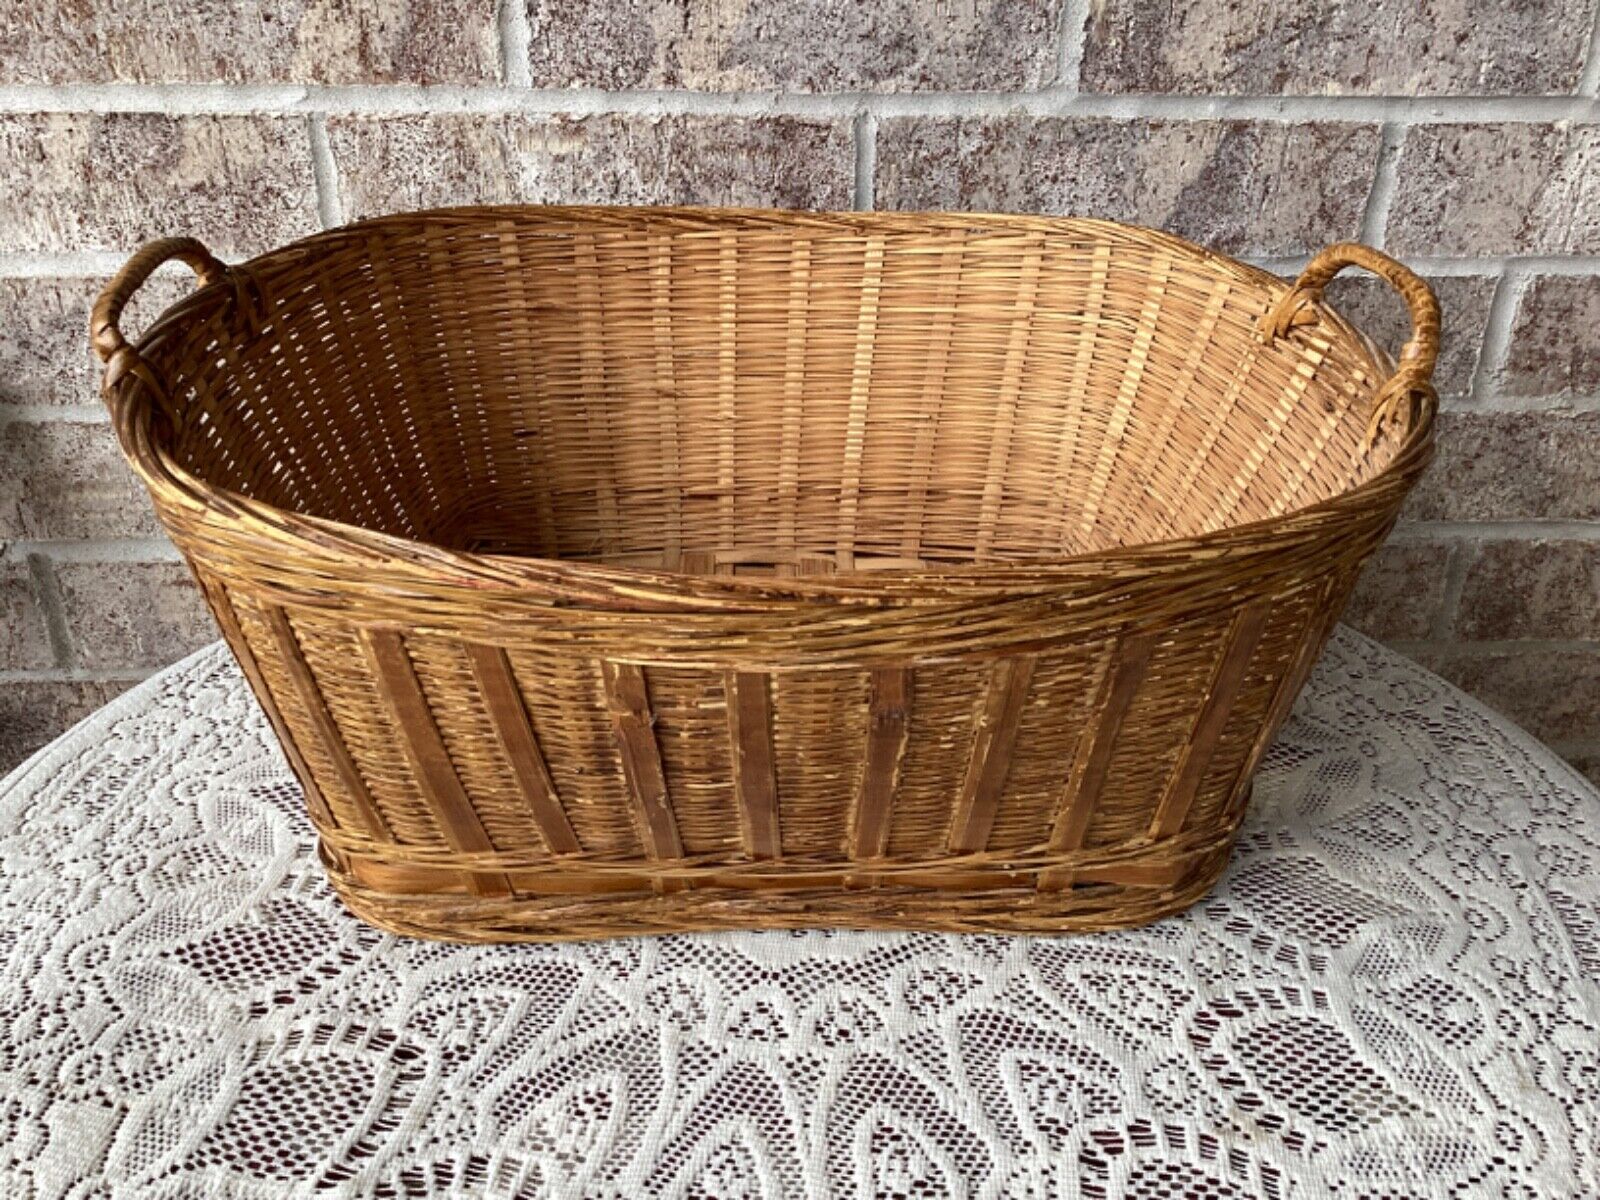 Vintage Wicker Woven Rectangular Basket With Handles 16”X14”X7” Country